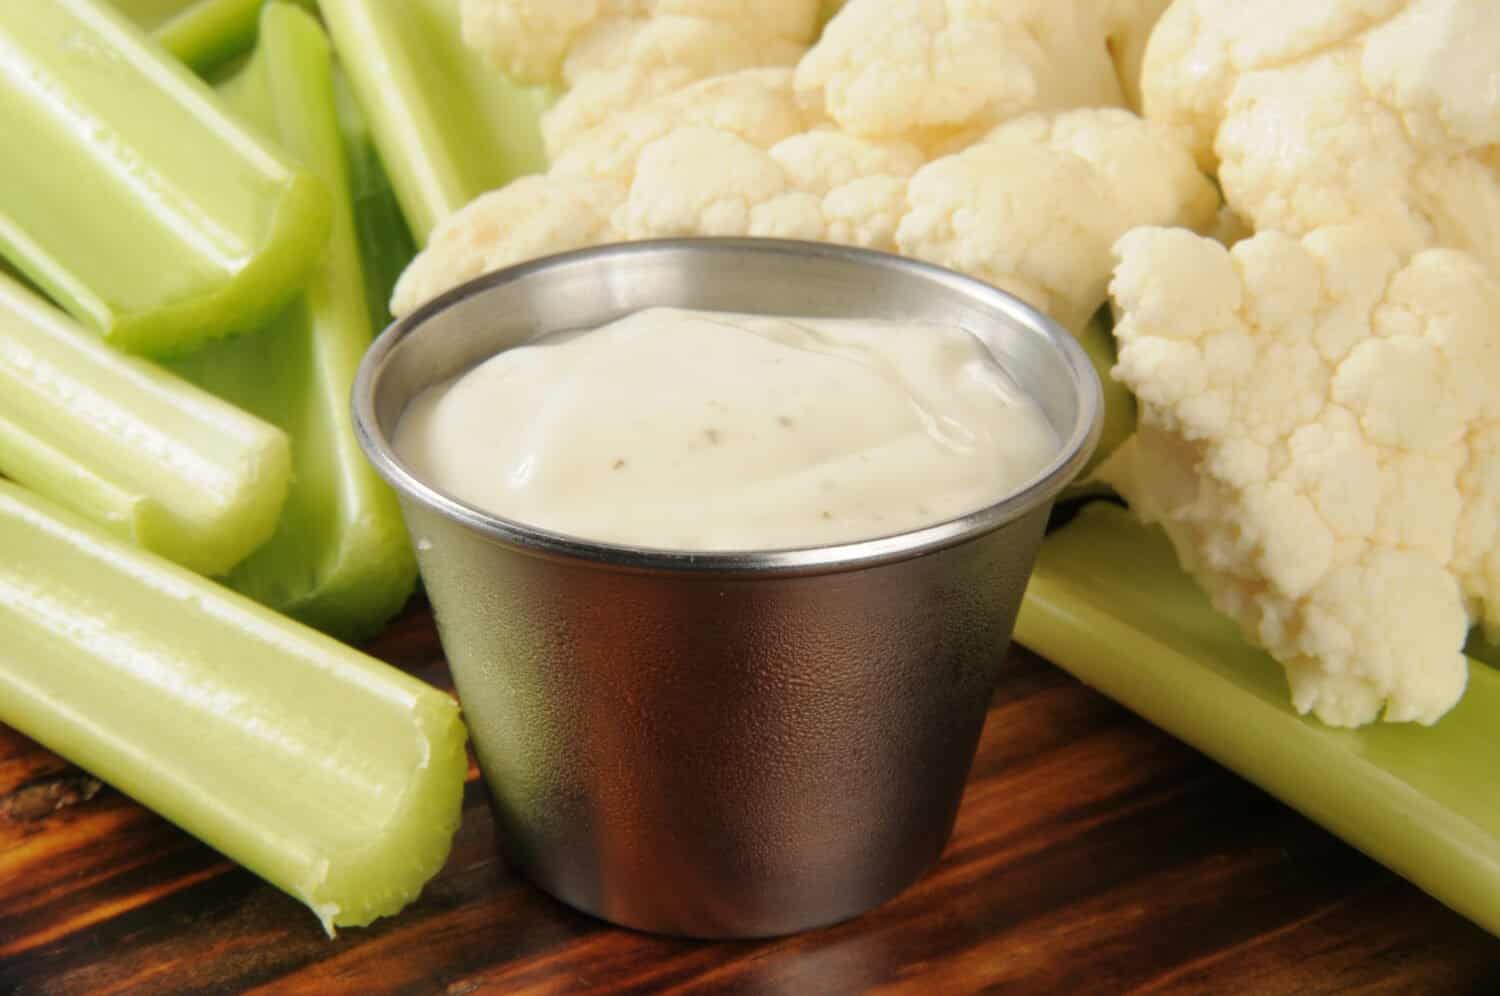 Closeup of celery sticks and cauliflower with a serving dish of ranch dressing dip